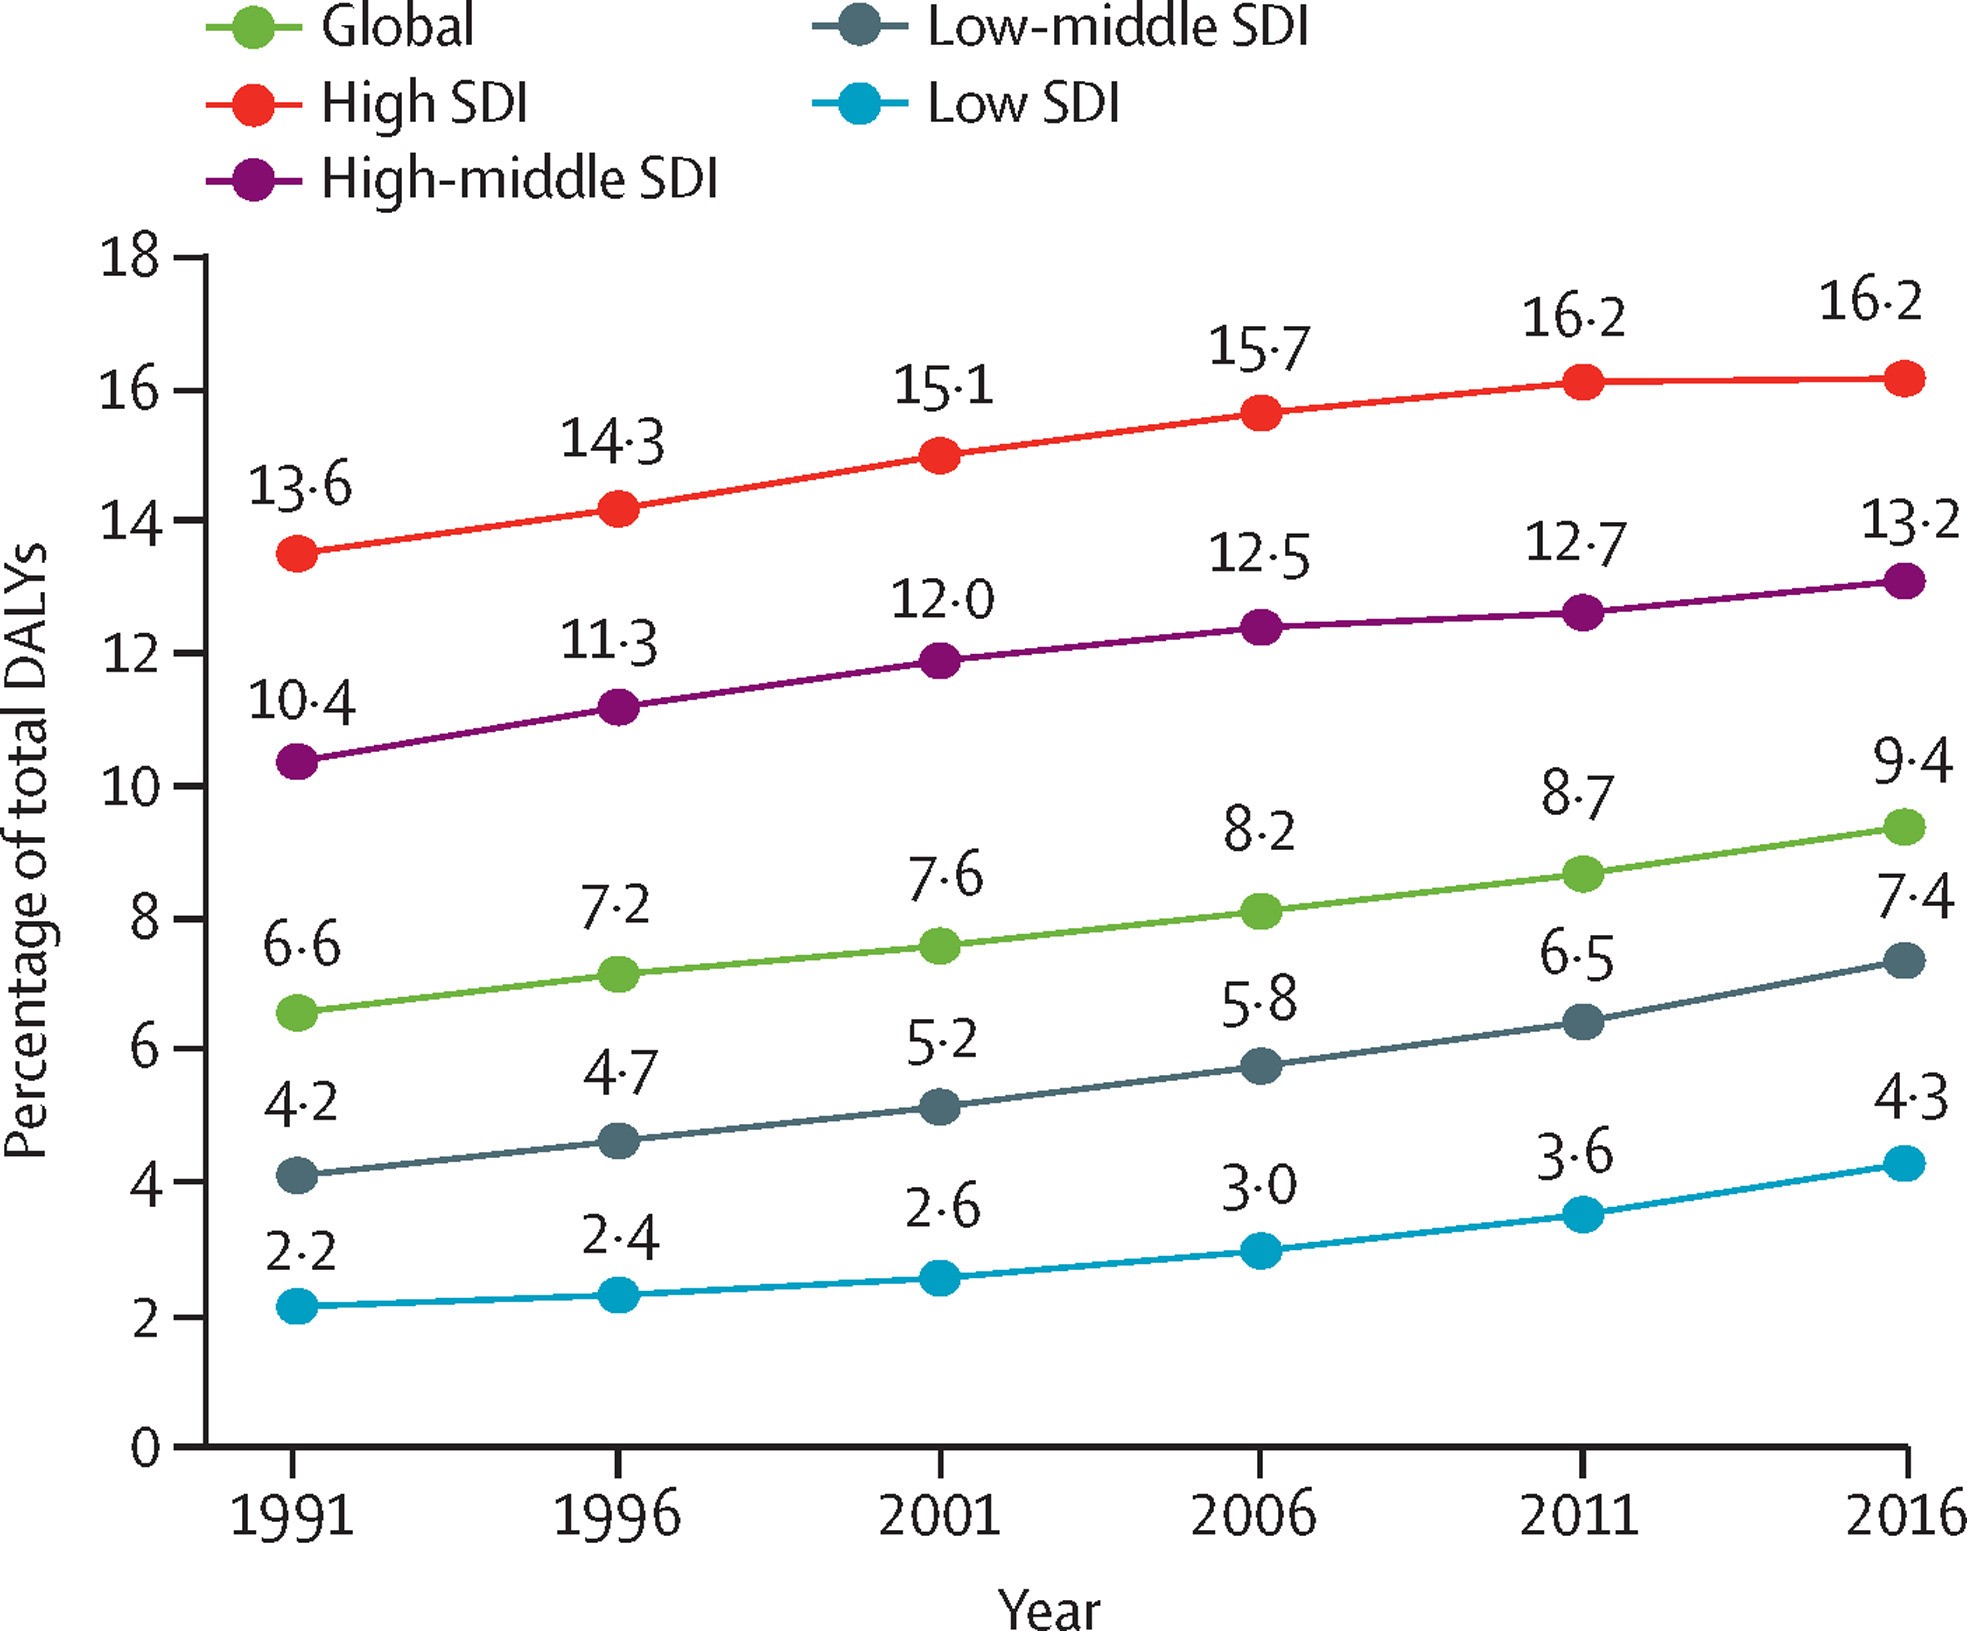 The rising burden of mental and substance use disorders globally